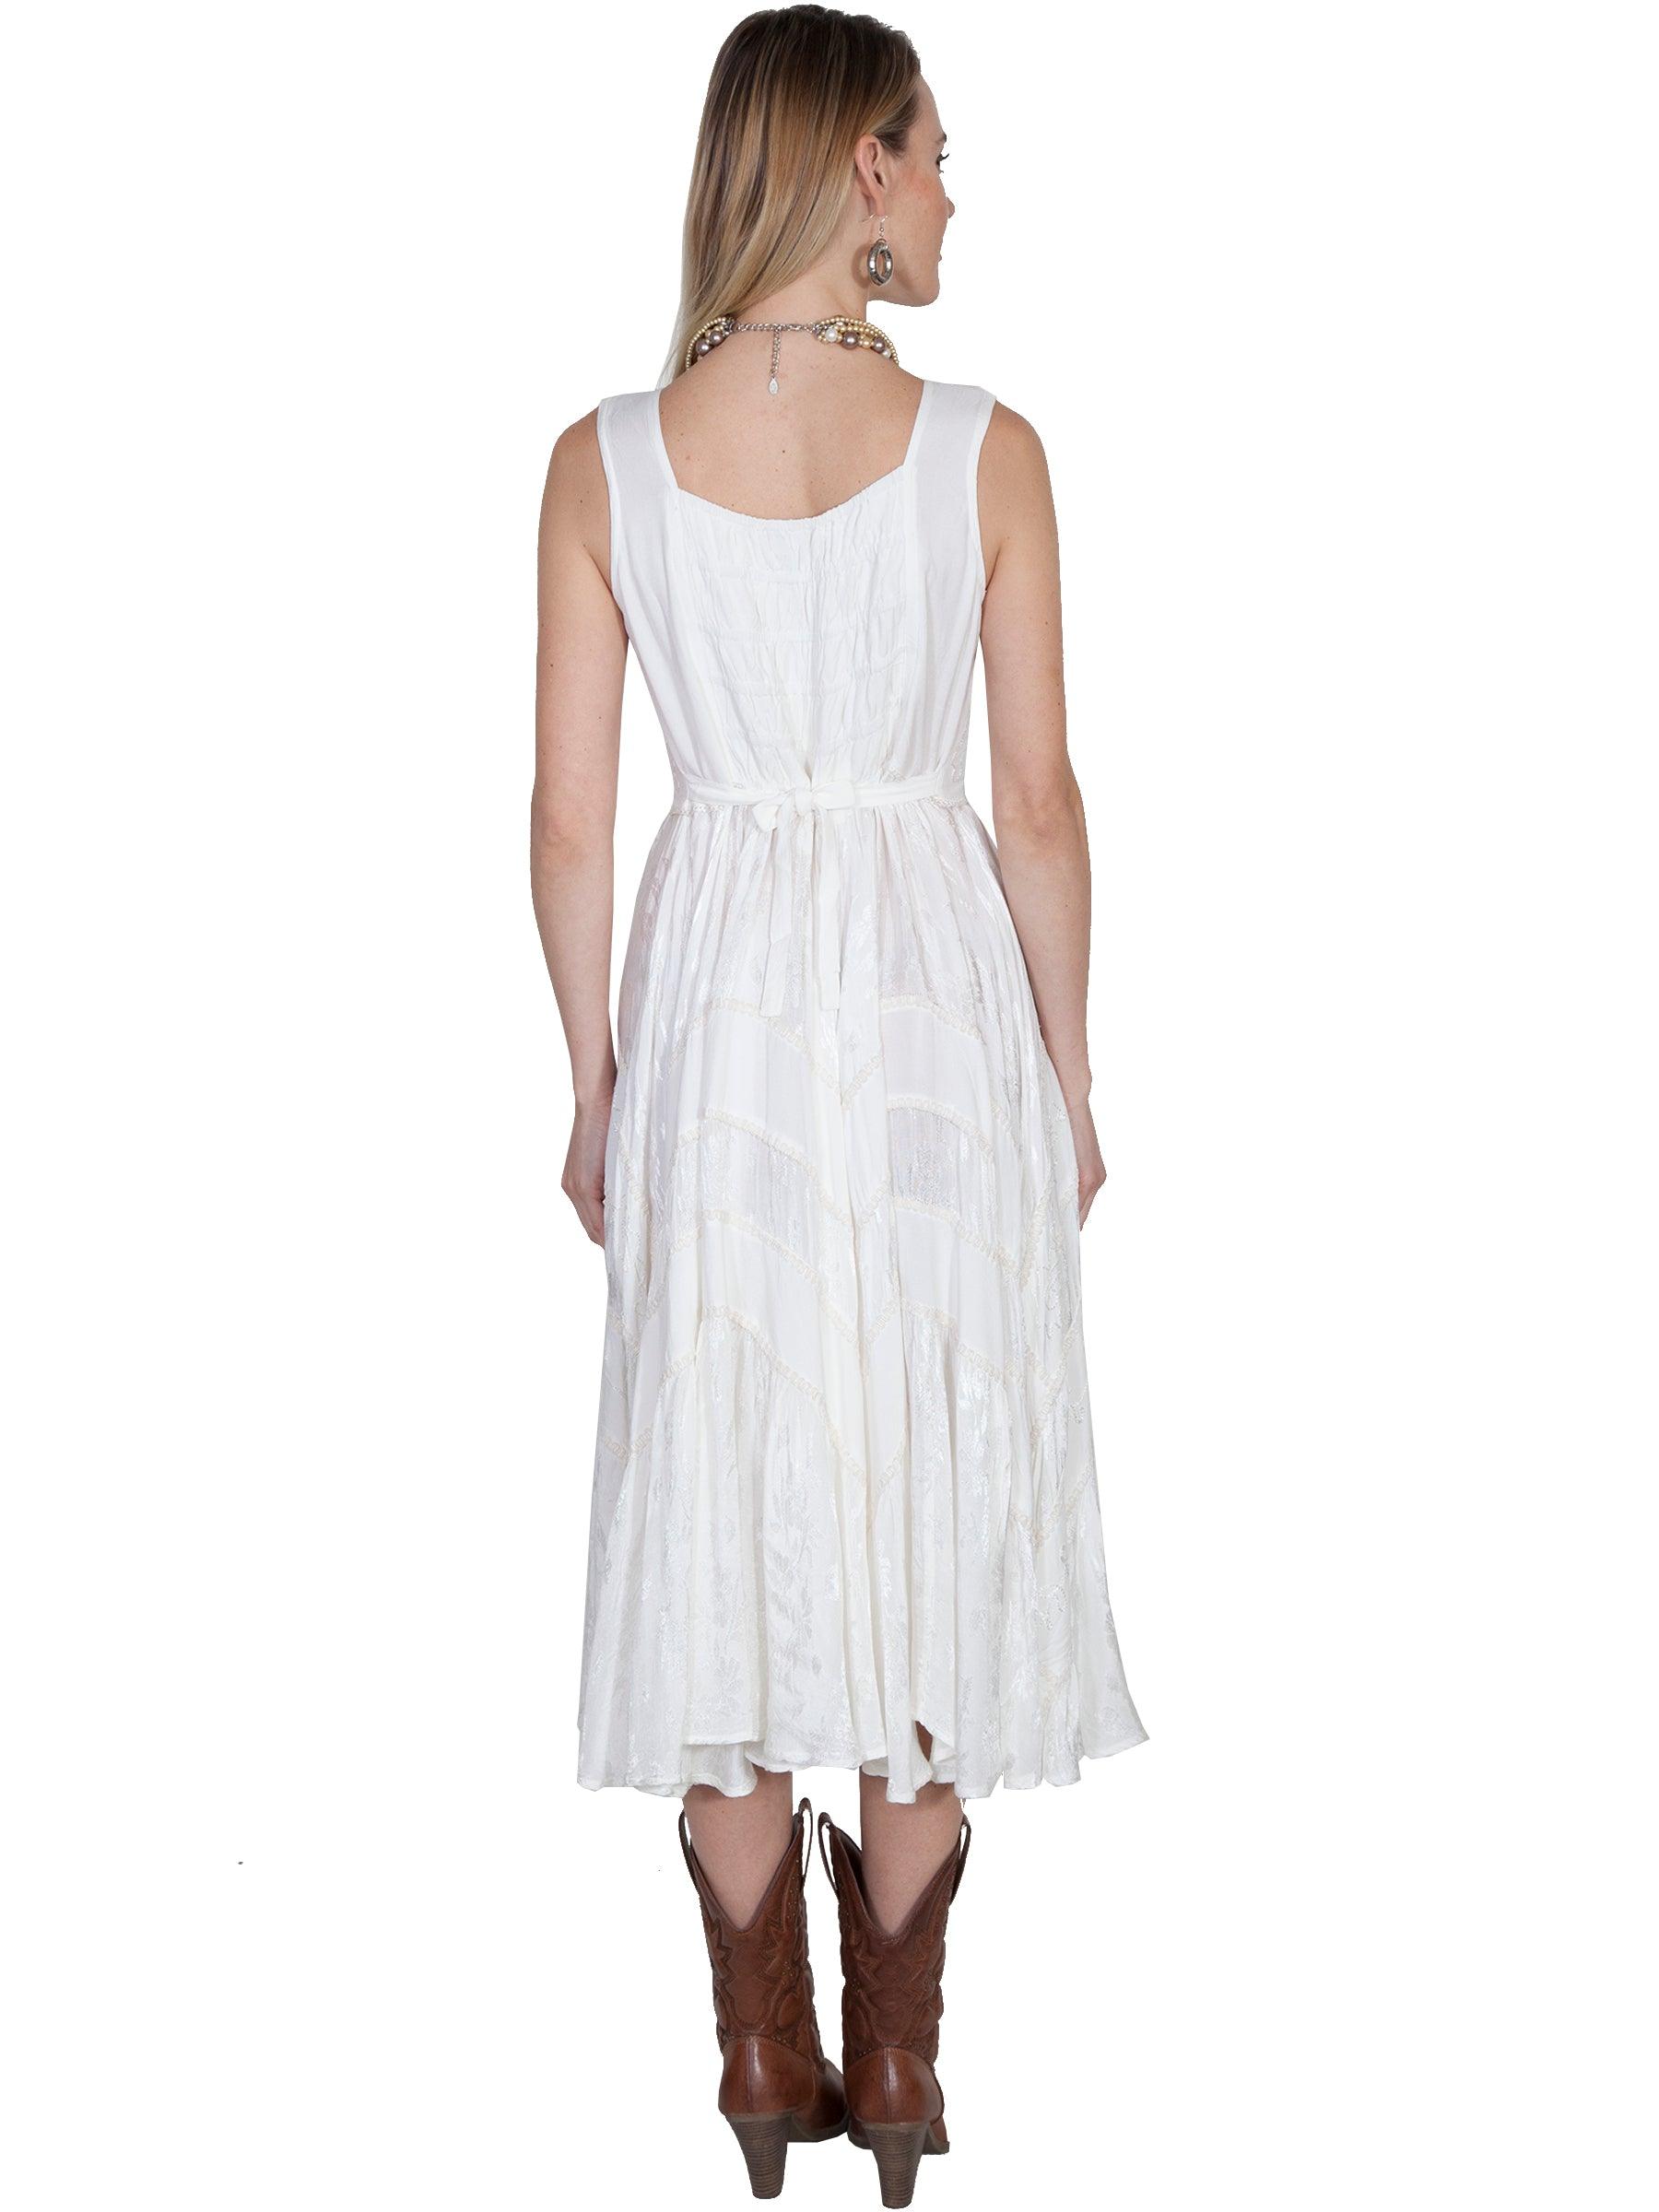 Scully IVORY LACE FRONT DRESS - Flyclothing LLC